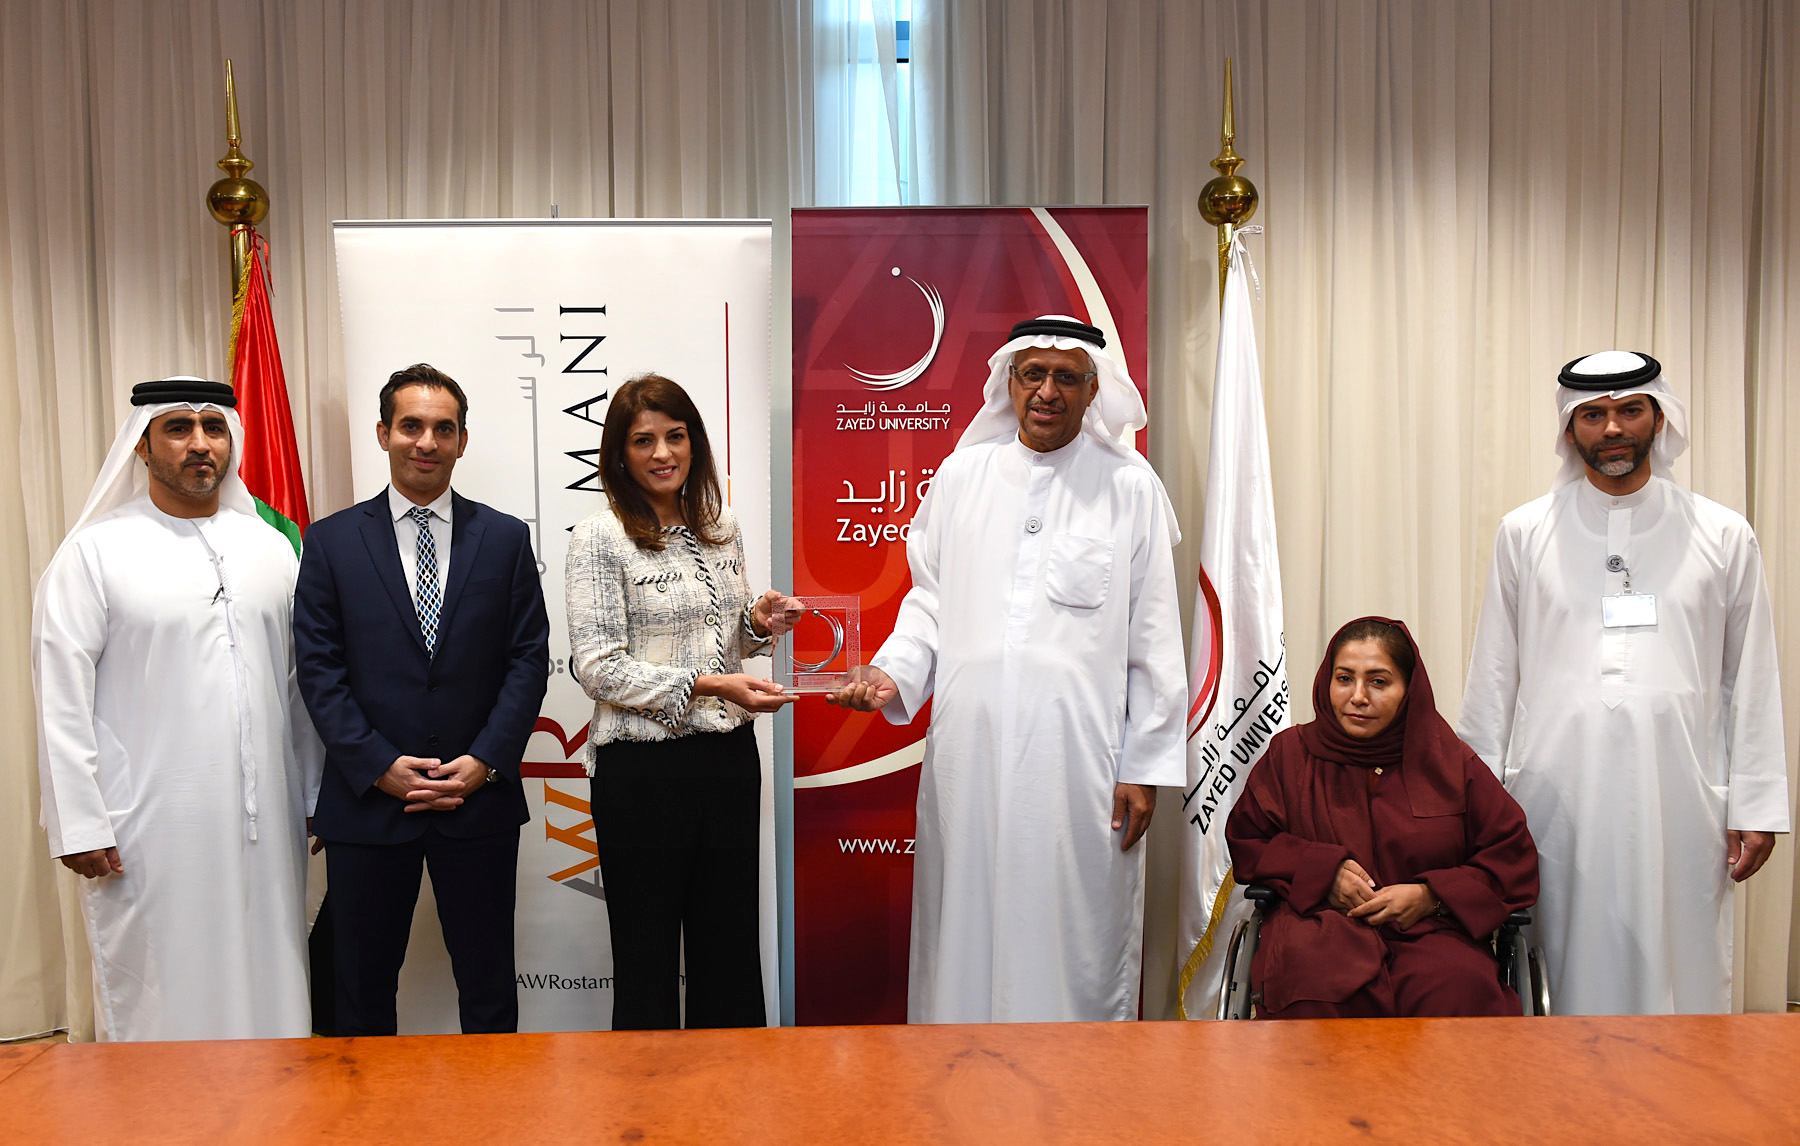 AW Rostamani Group Signs MoU with Zayed University to Support Students of Determination